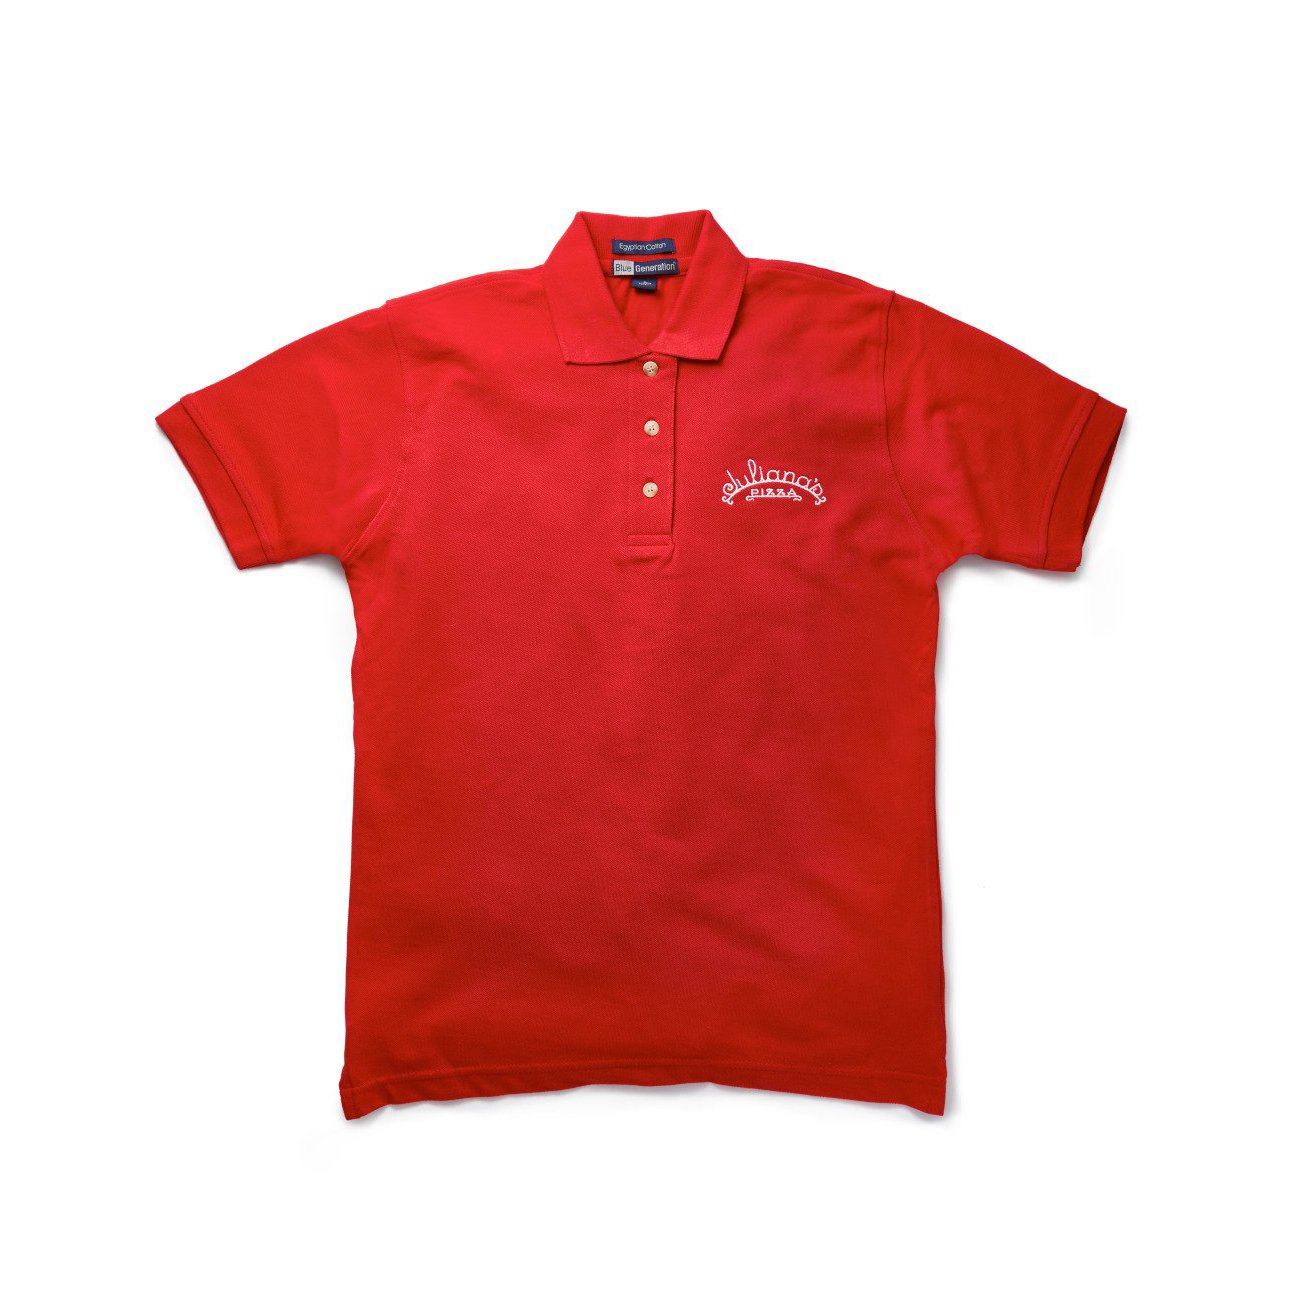 Red Polo - $18